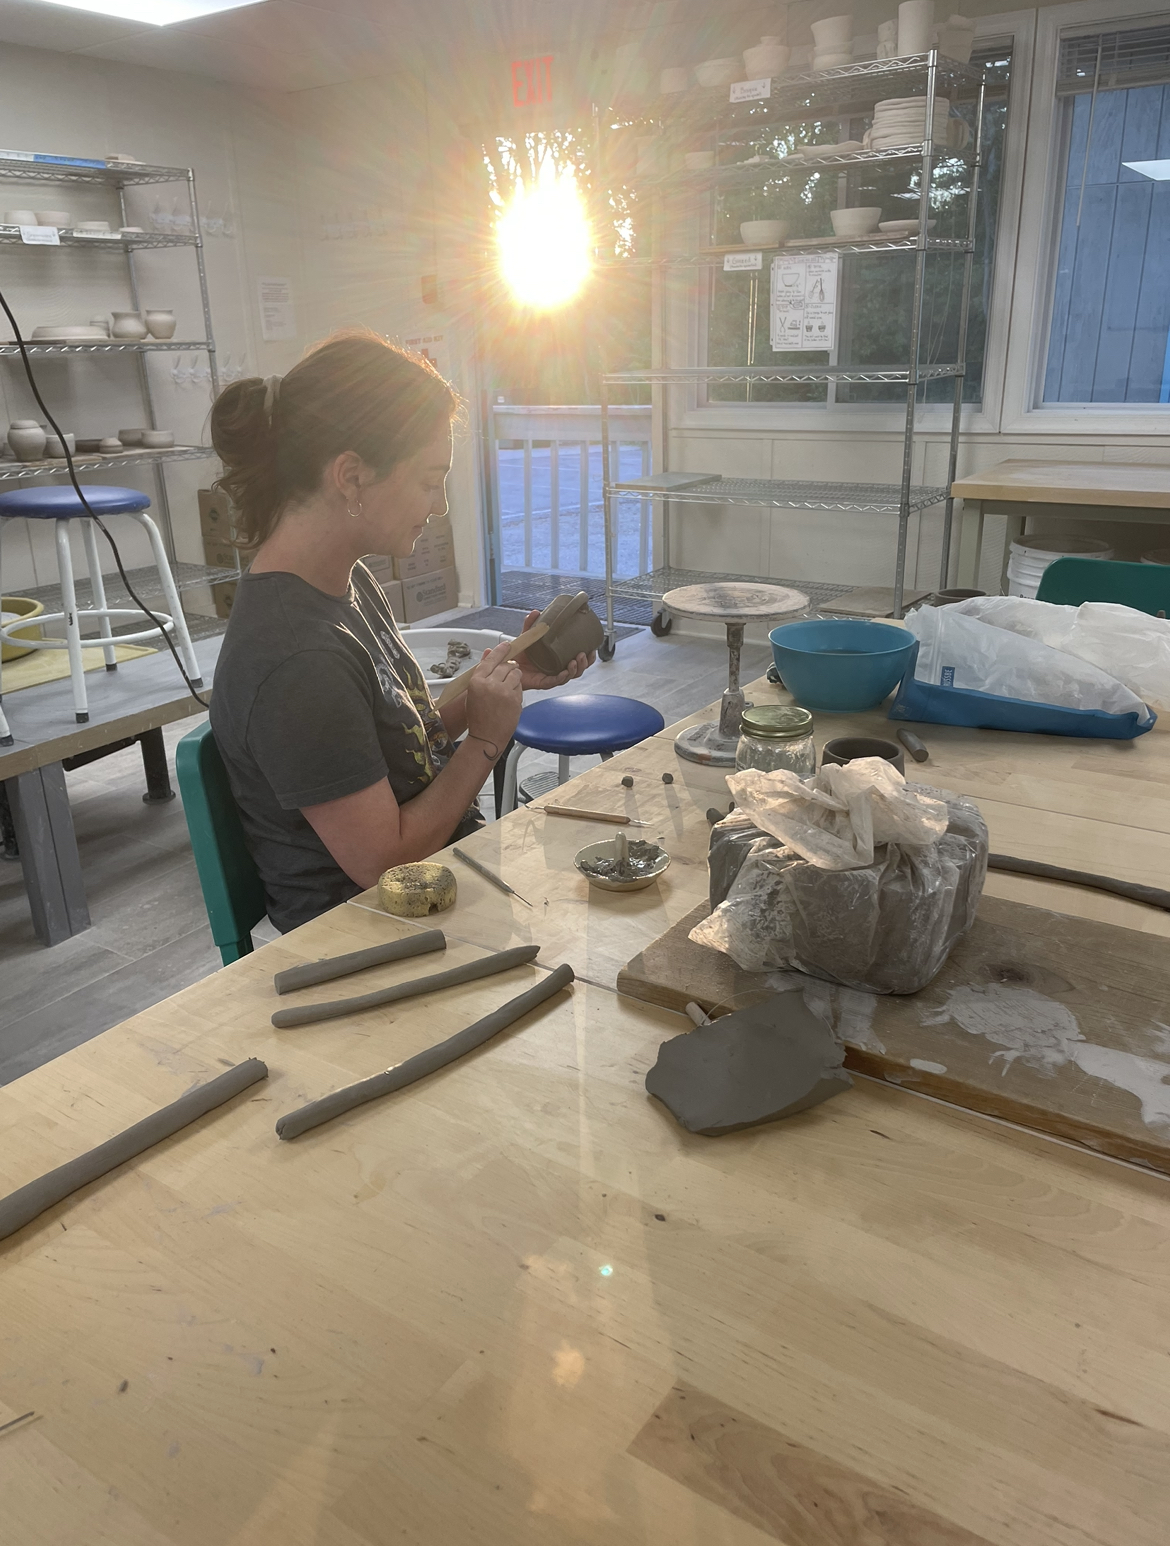 Shaigh Sisk, a woman with curly brown hair pulled back in a ponytail, sits at a pottery studio workbench sculpting a ceramic mug, while the sun shines brightly in through the studio door and casts rays across the image. Shaigh wears a dark gray tee and small hoop earrings. The mug in her hands is gray clay, and blocks and rolls of the same clay sit on the bench near her, along with sculpting tools and sponges. Racks with drying pottery in various shades of beige are visible behind her.